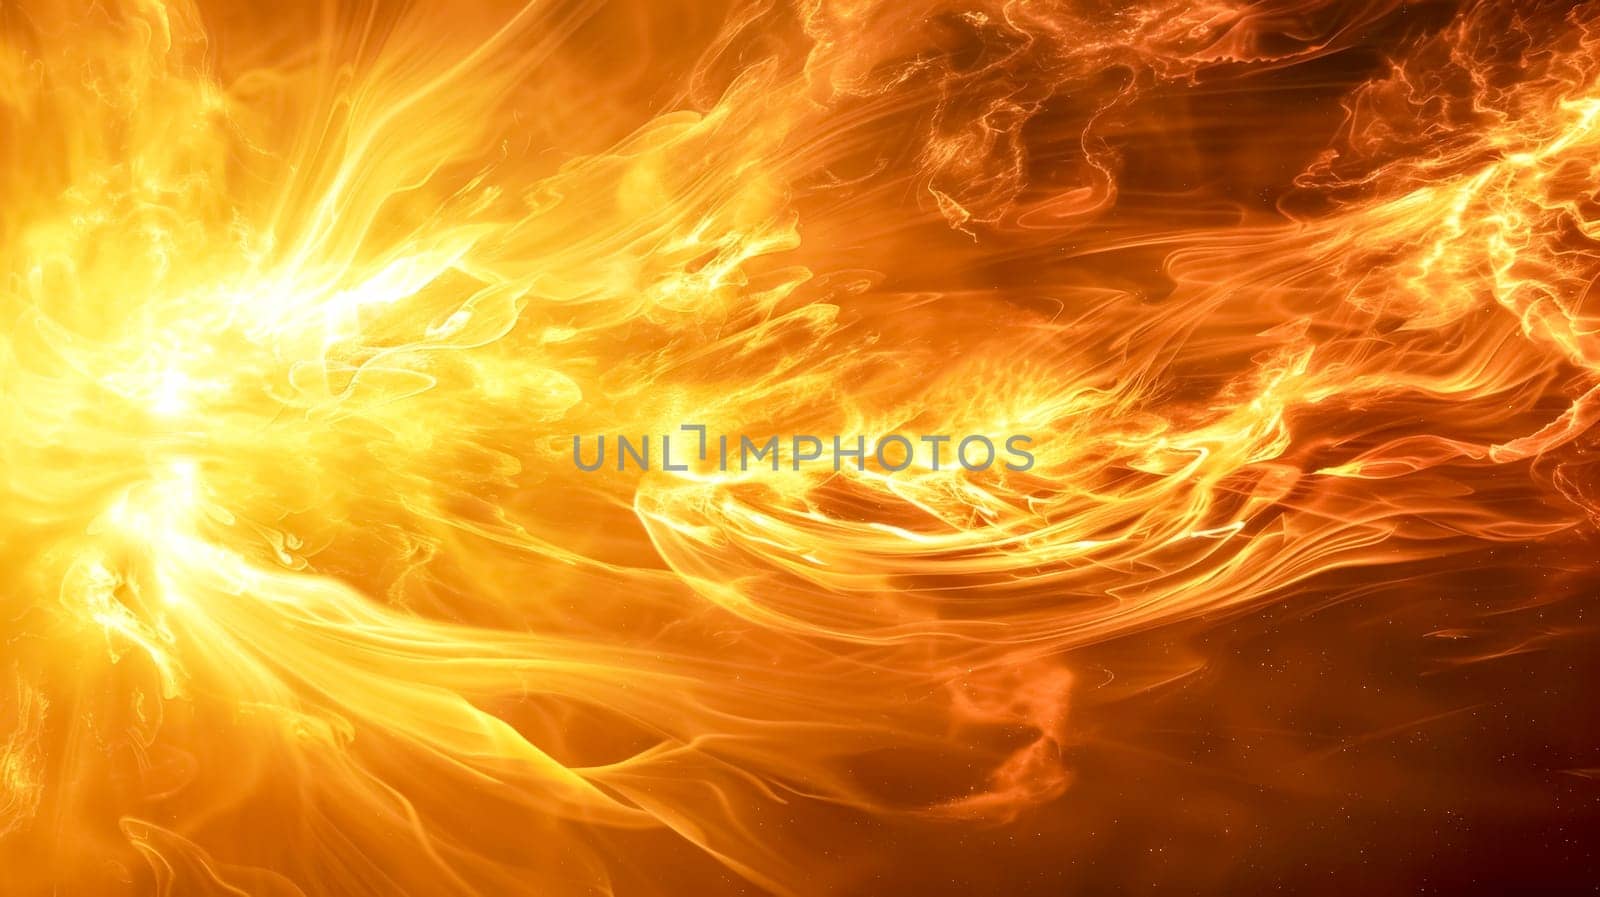 Dynamic image of intense flames and glowing energy with a vibrant orange hue by Edophoto